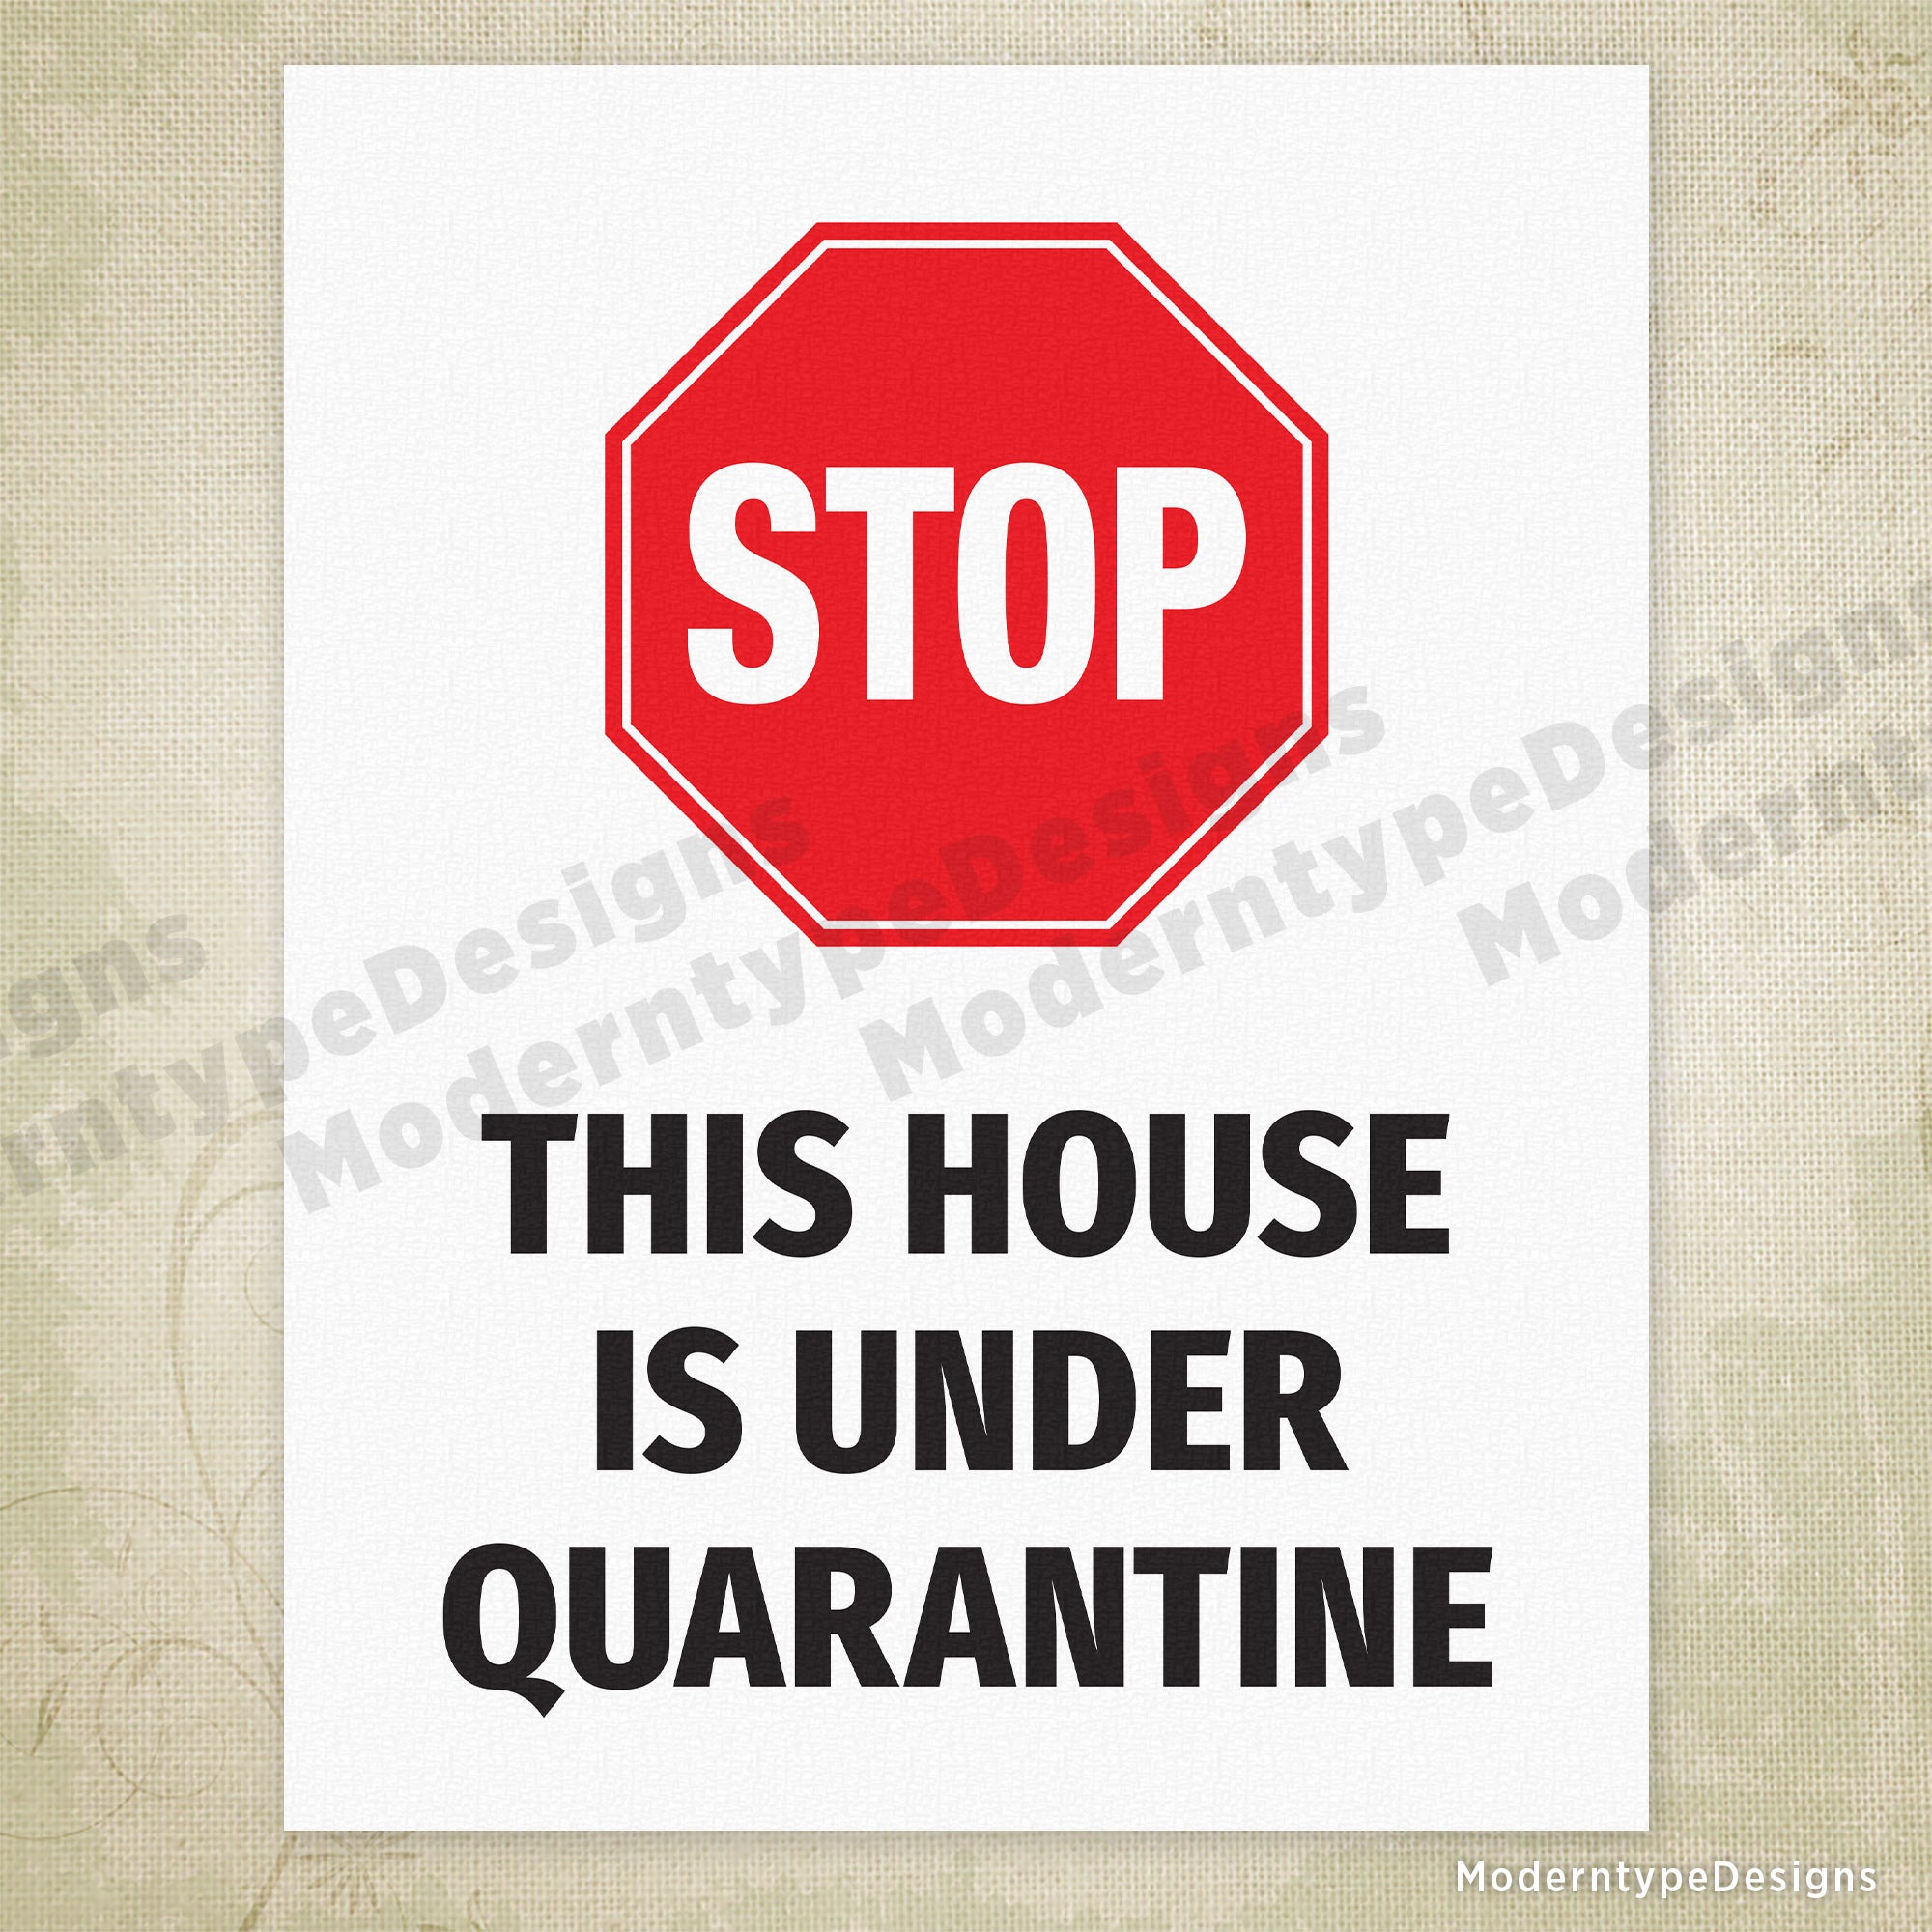 This House is Under Quarantine Printable Sign